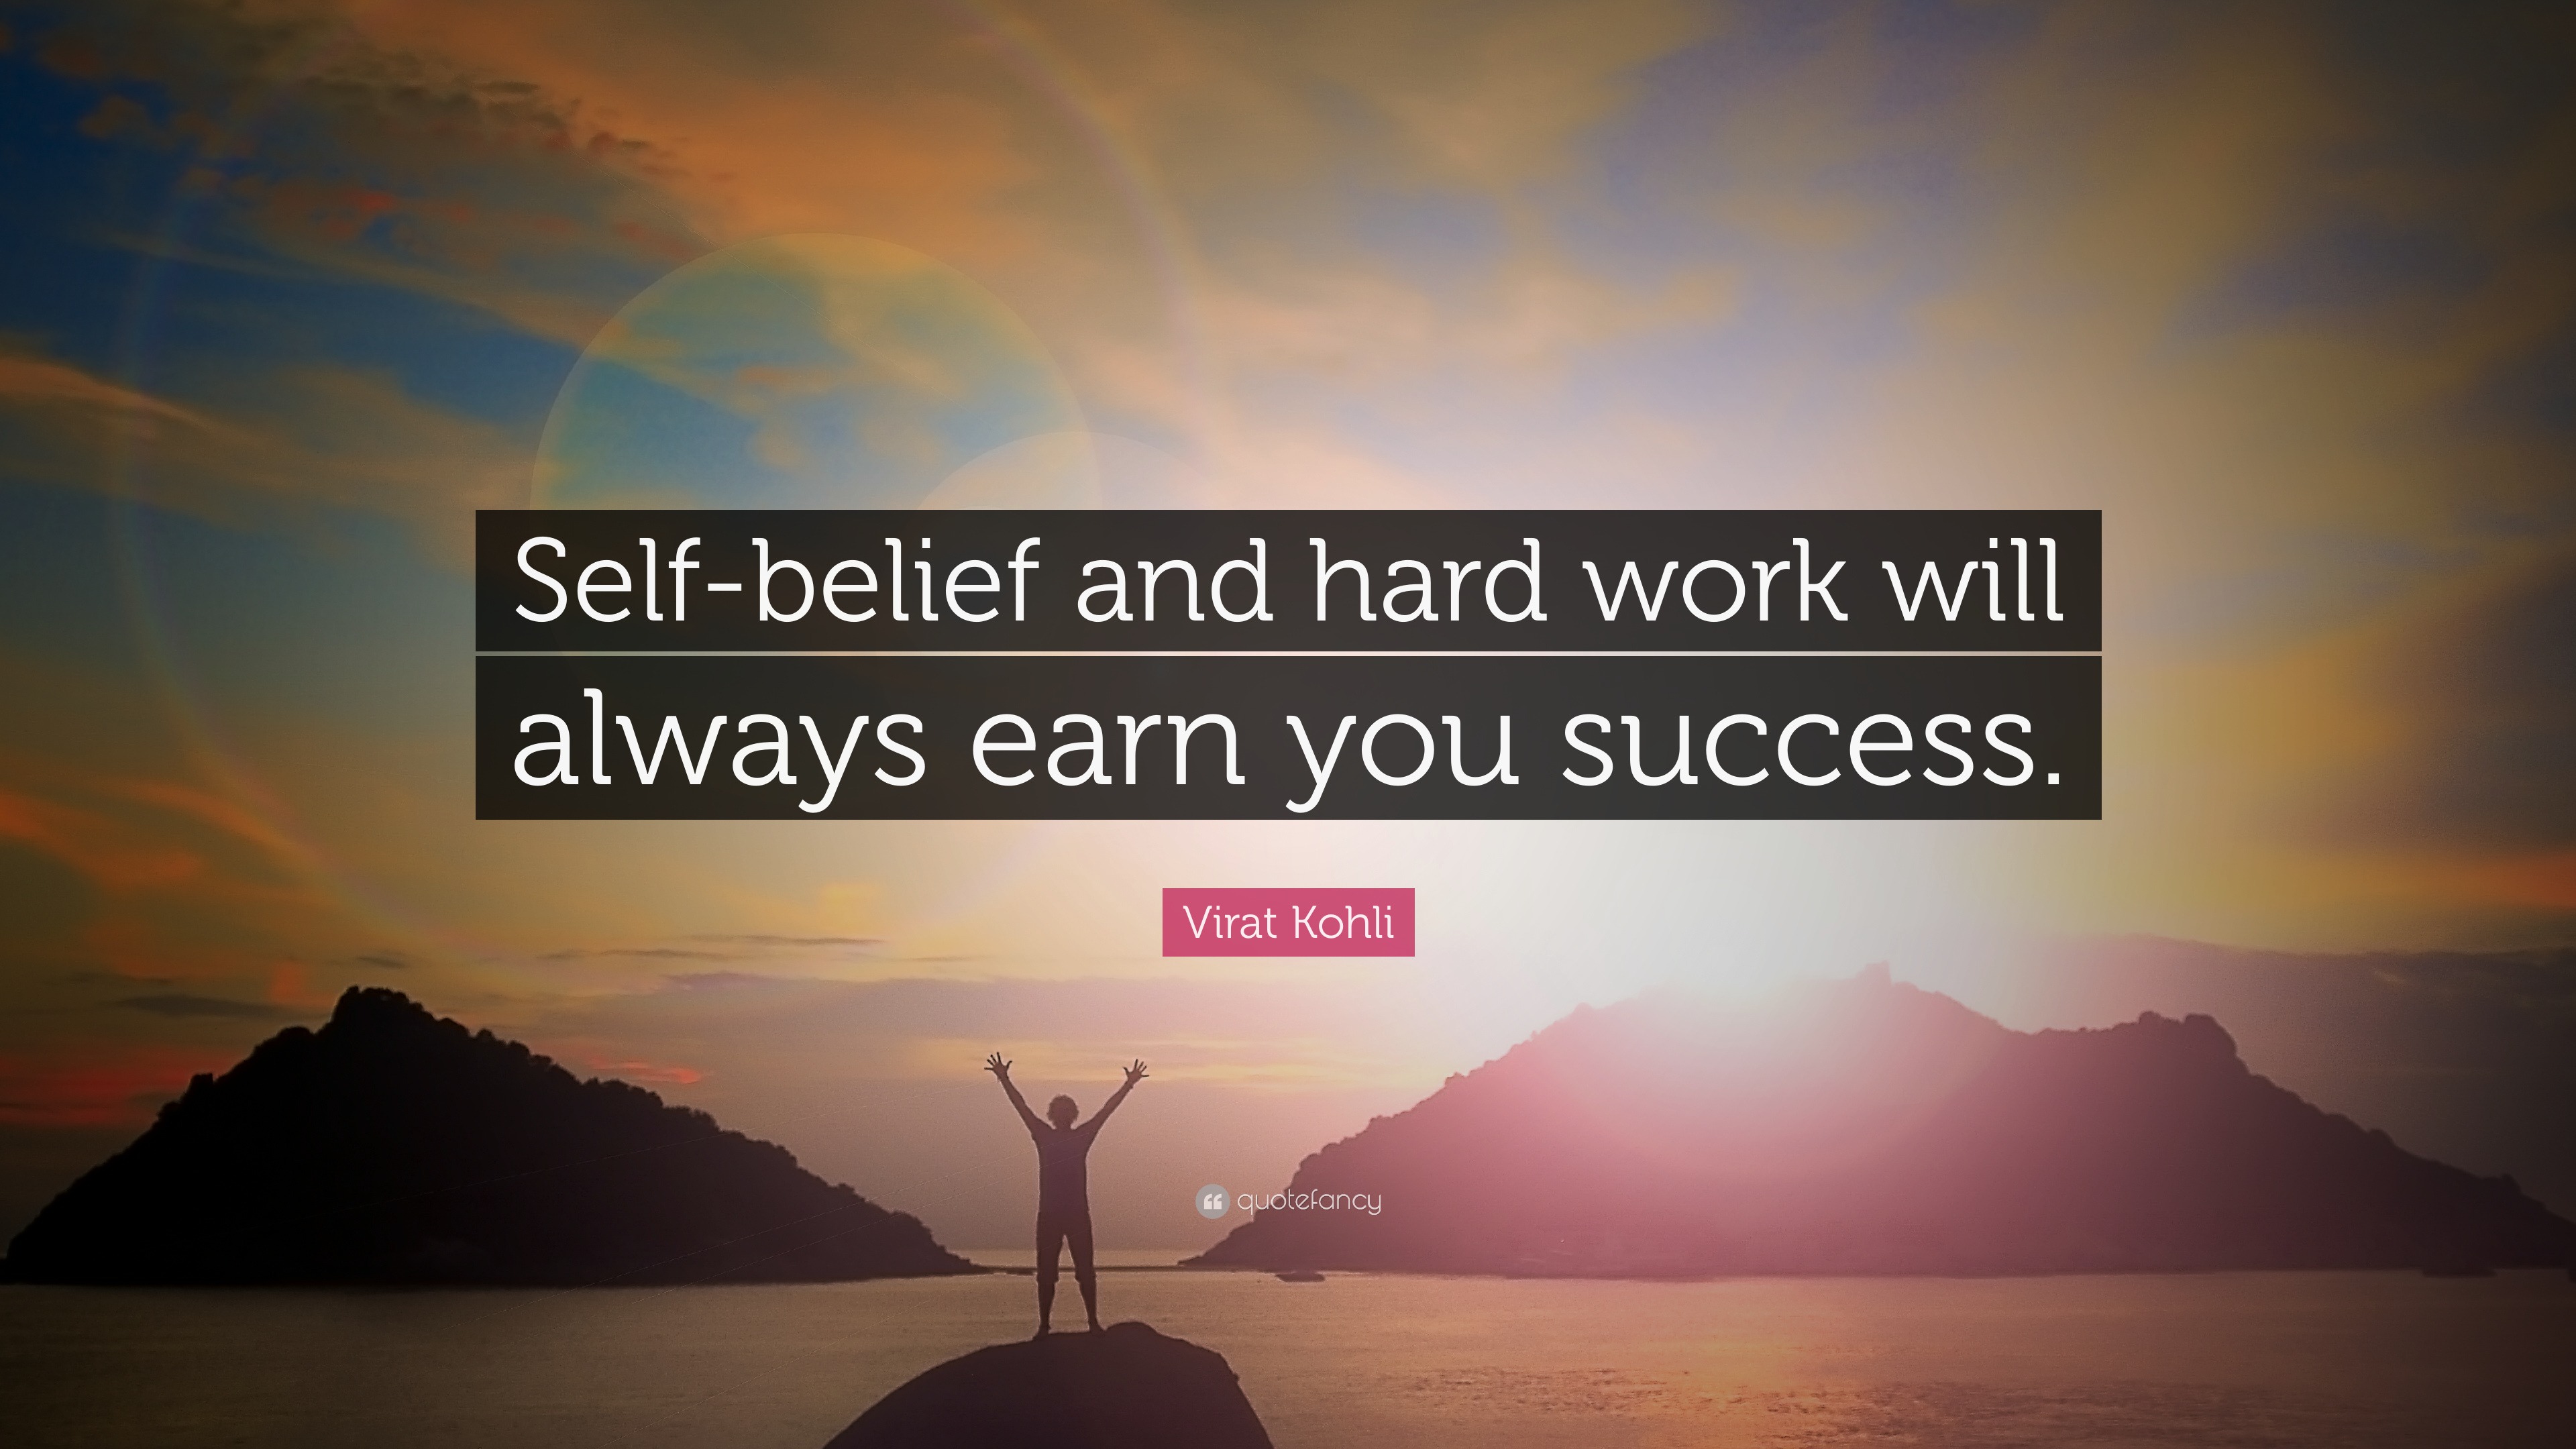 Virat Kohli Quote: “Self-belief and hard work will always earn you